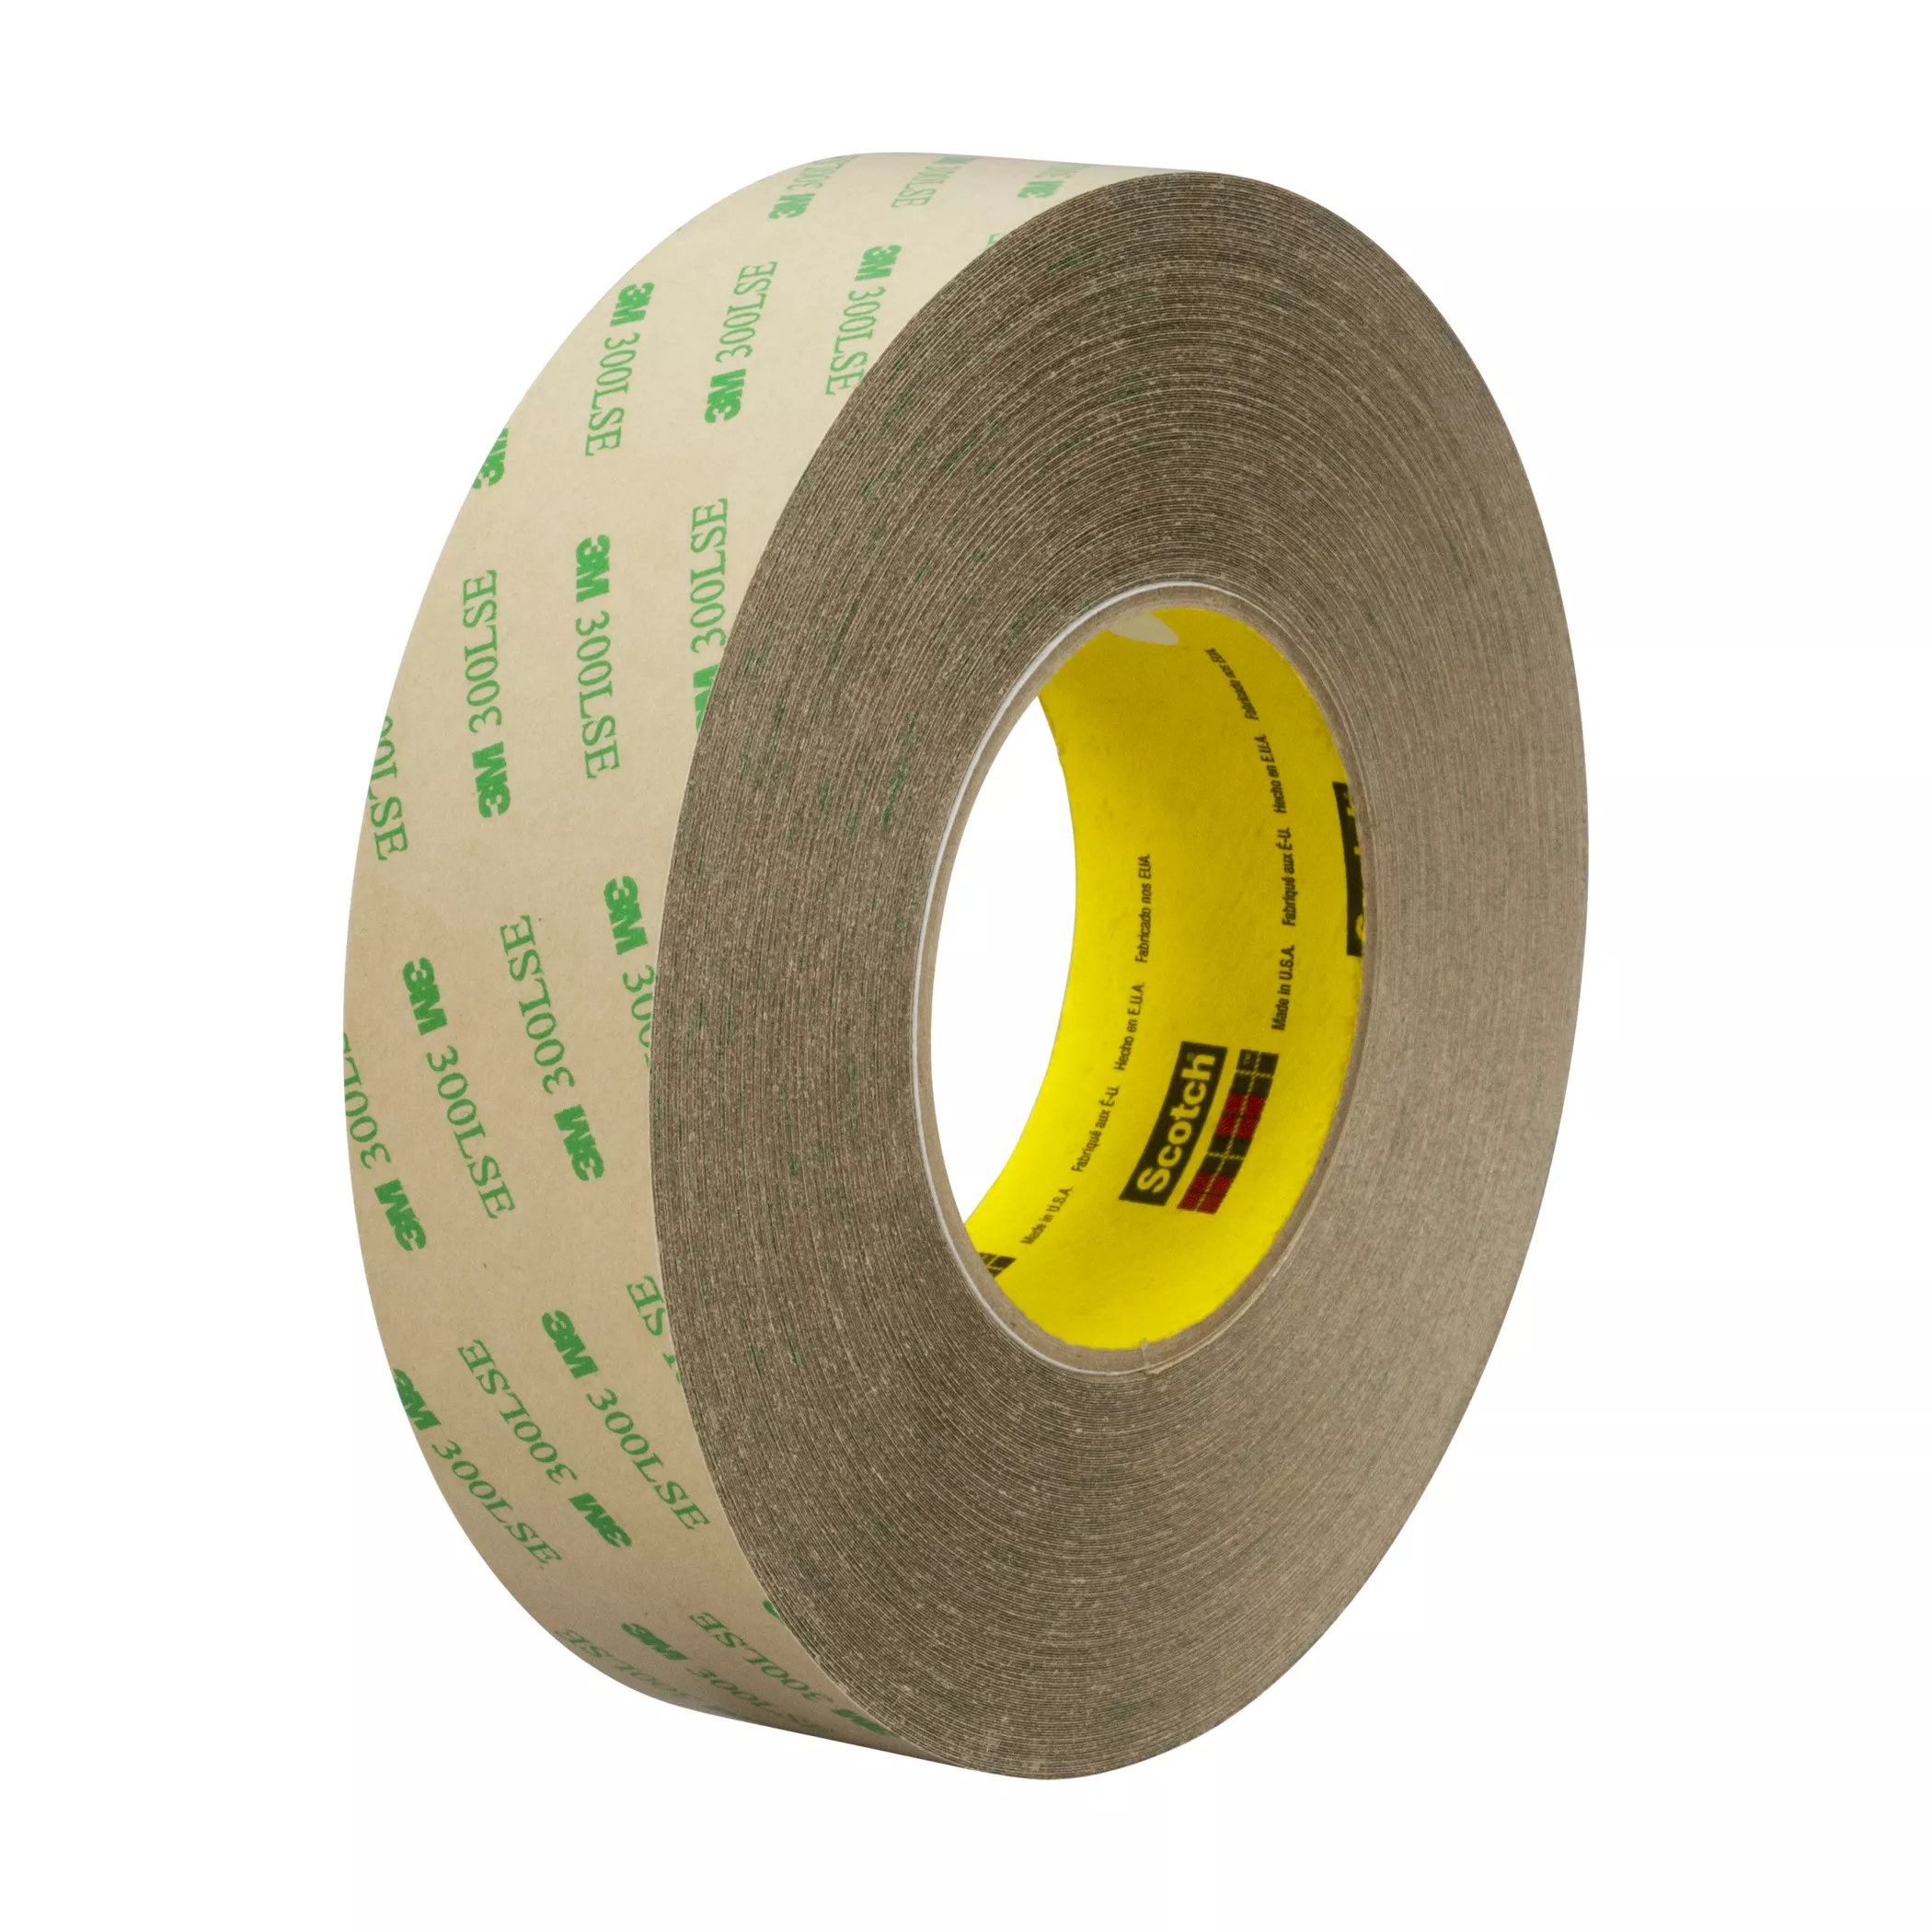 3M™ Adhesive Transfer Tape 9672LE, Clear, 24 in x 180 yd, 5 mil, 1
Roll/Case